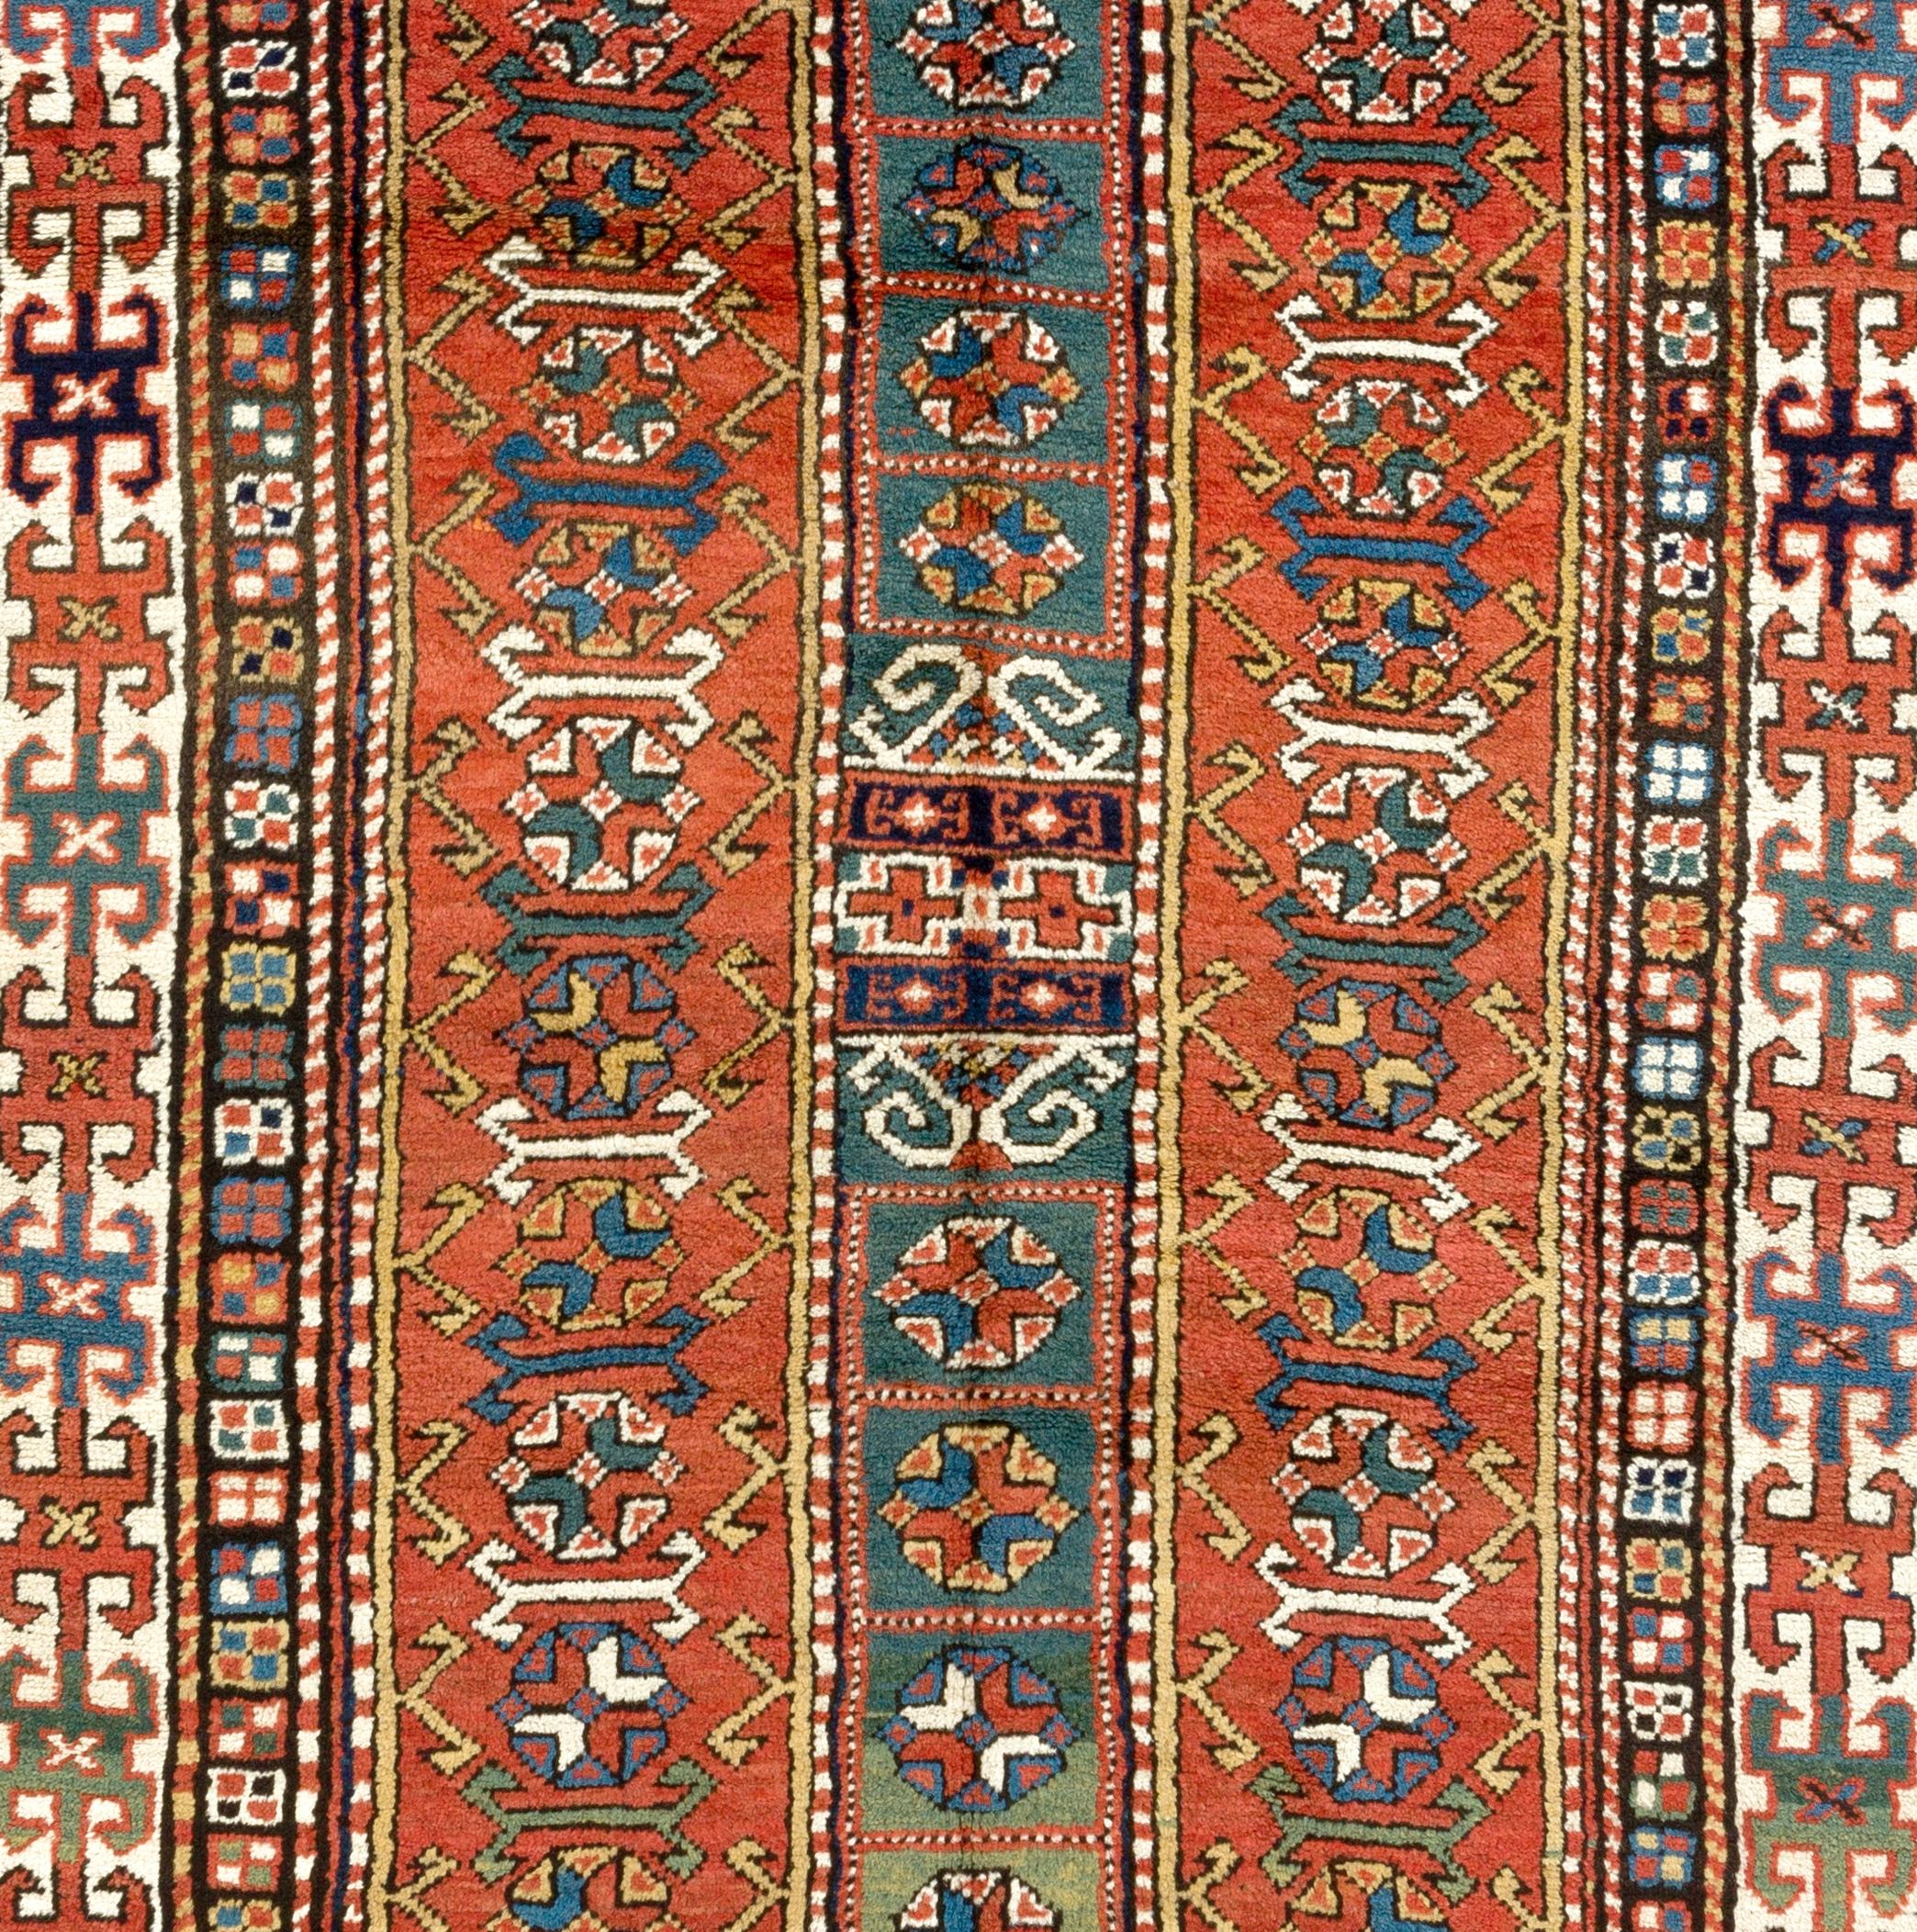 A highly decorative antique West Caucasian Kurdish rug in good condition with soft even medium pile from late 19th century with great visual interest. The rug features two narrow elongated lozenge-shaped red panels with another narrow rectangular